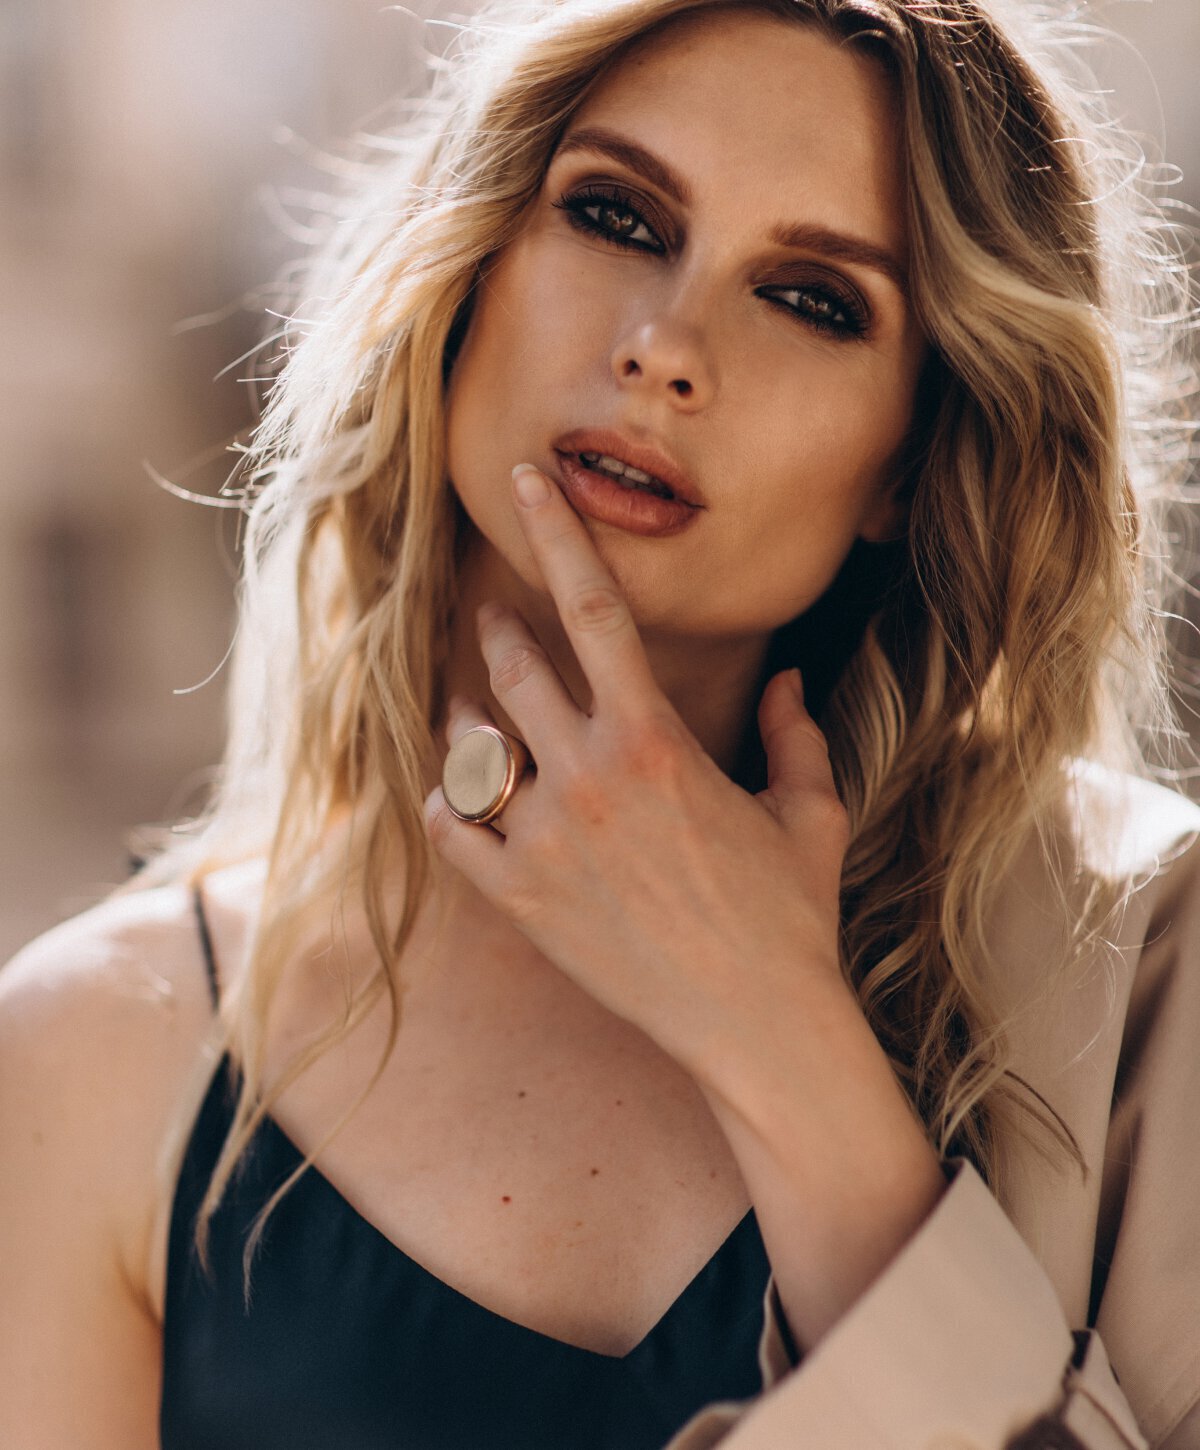 Vienna facial contouring model with blonde hair